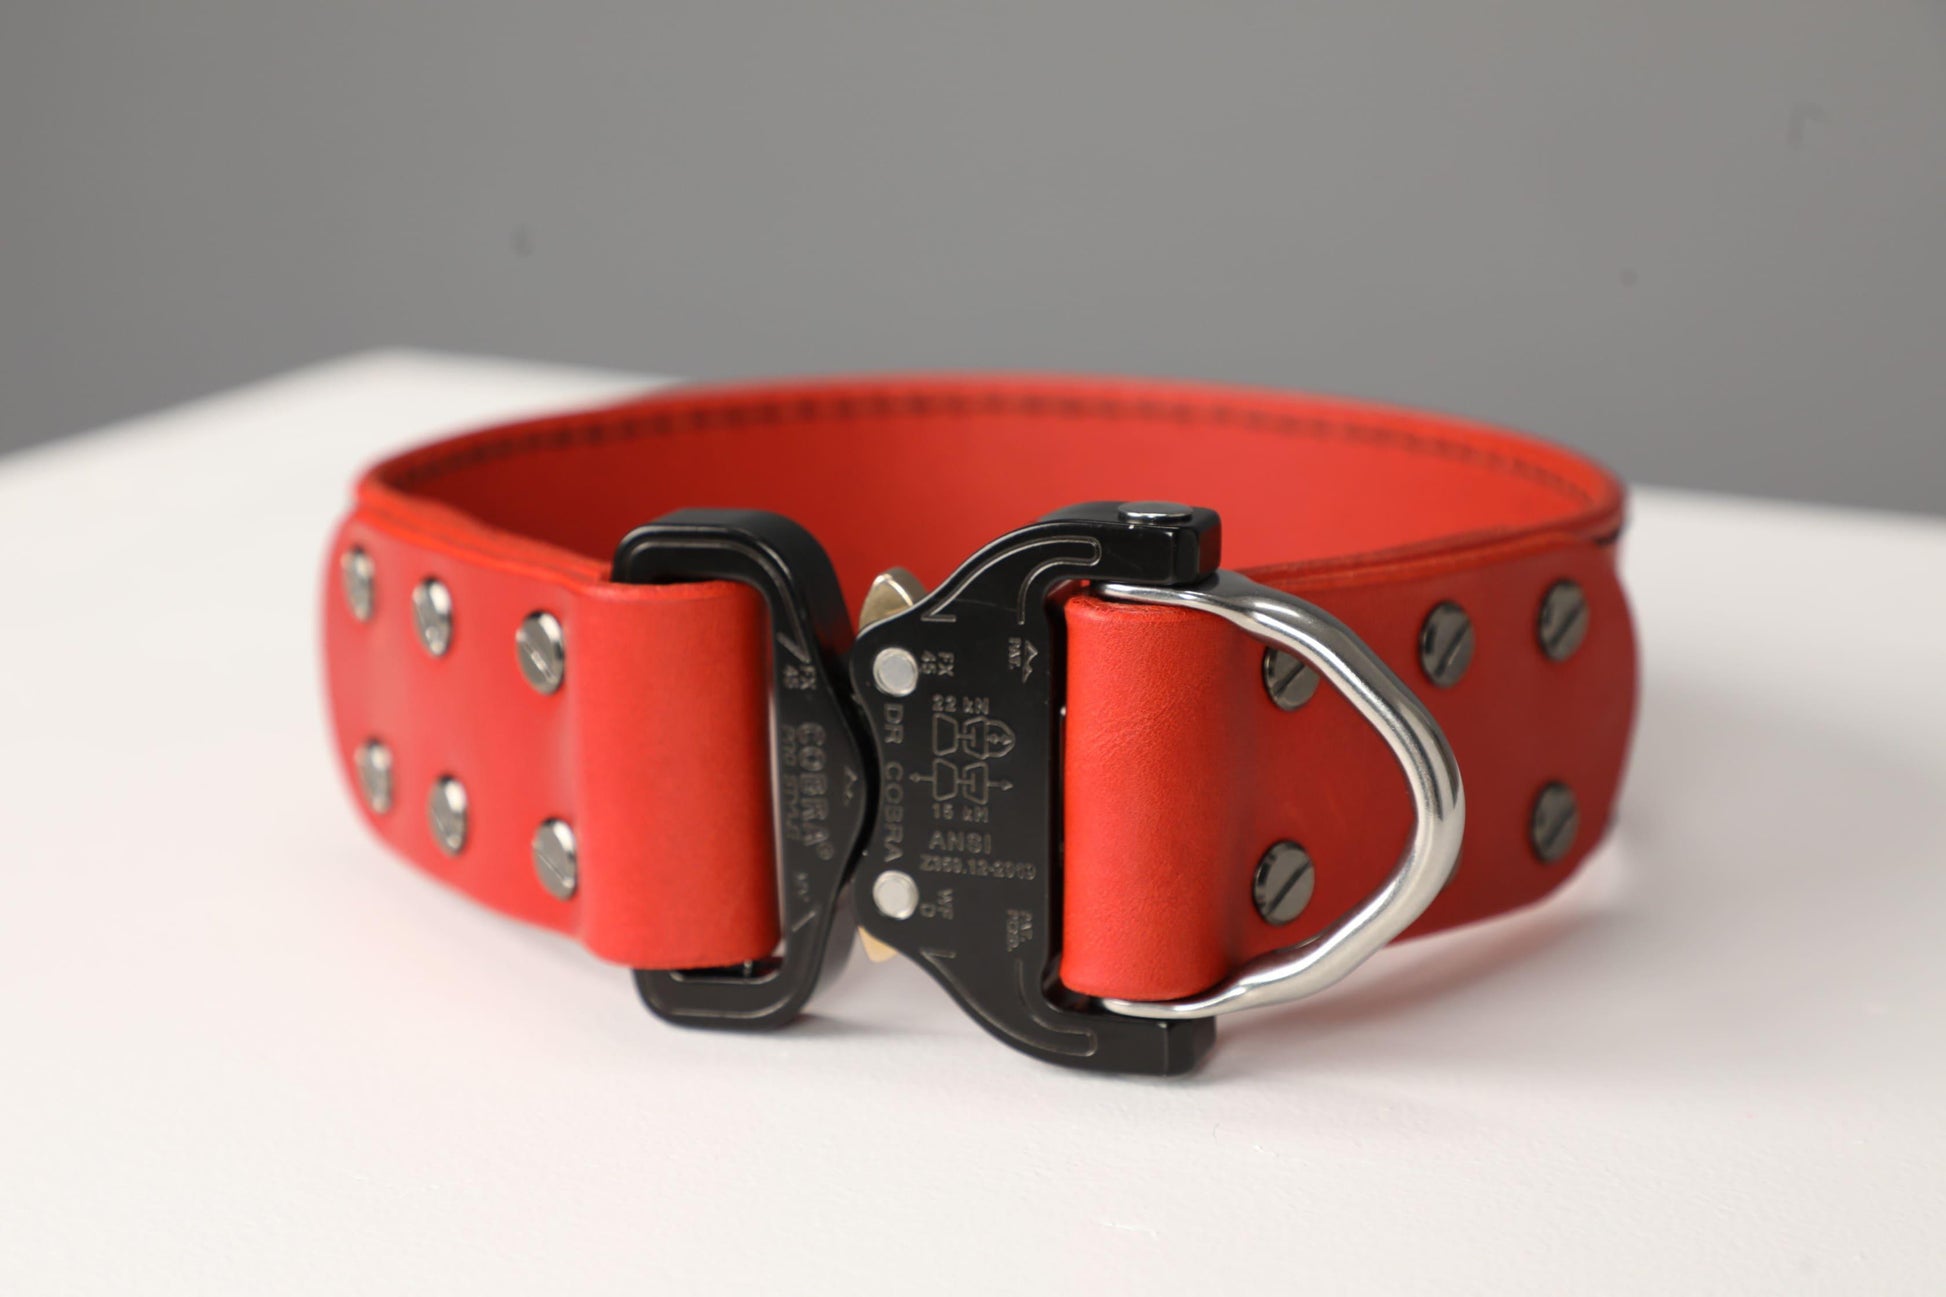 Red leather dog collar with COBRA® buckle - handmade in Lithuania by My Wild Other